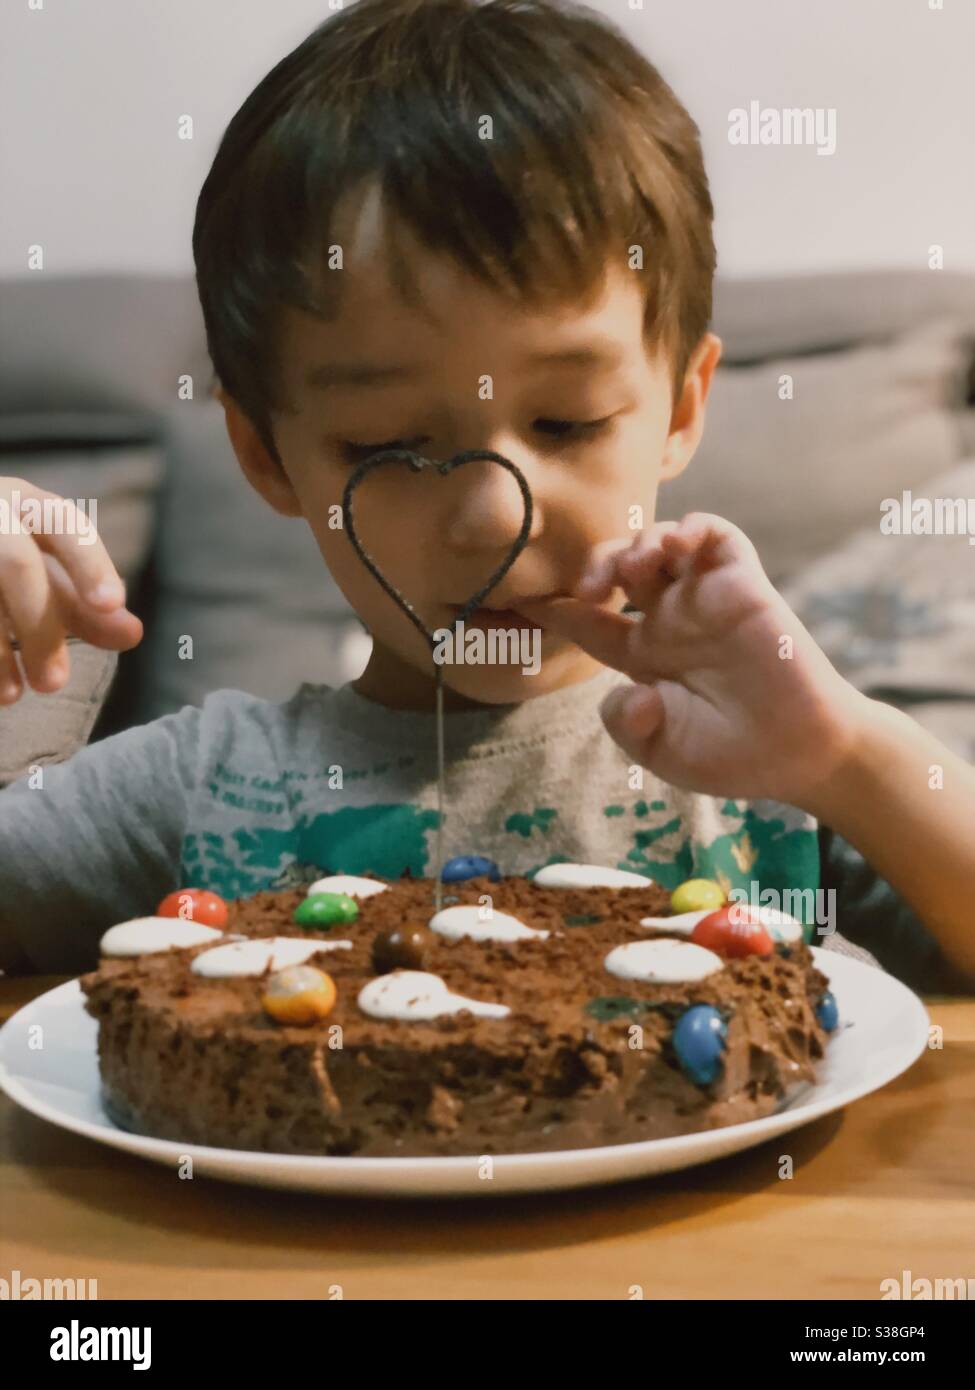 A boy and a cake Stock Photo